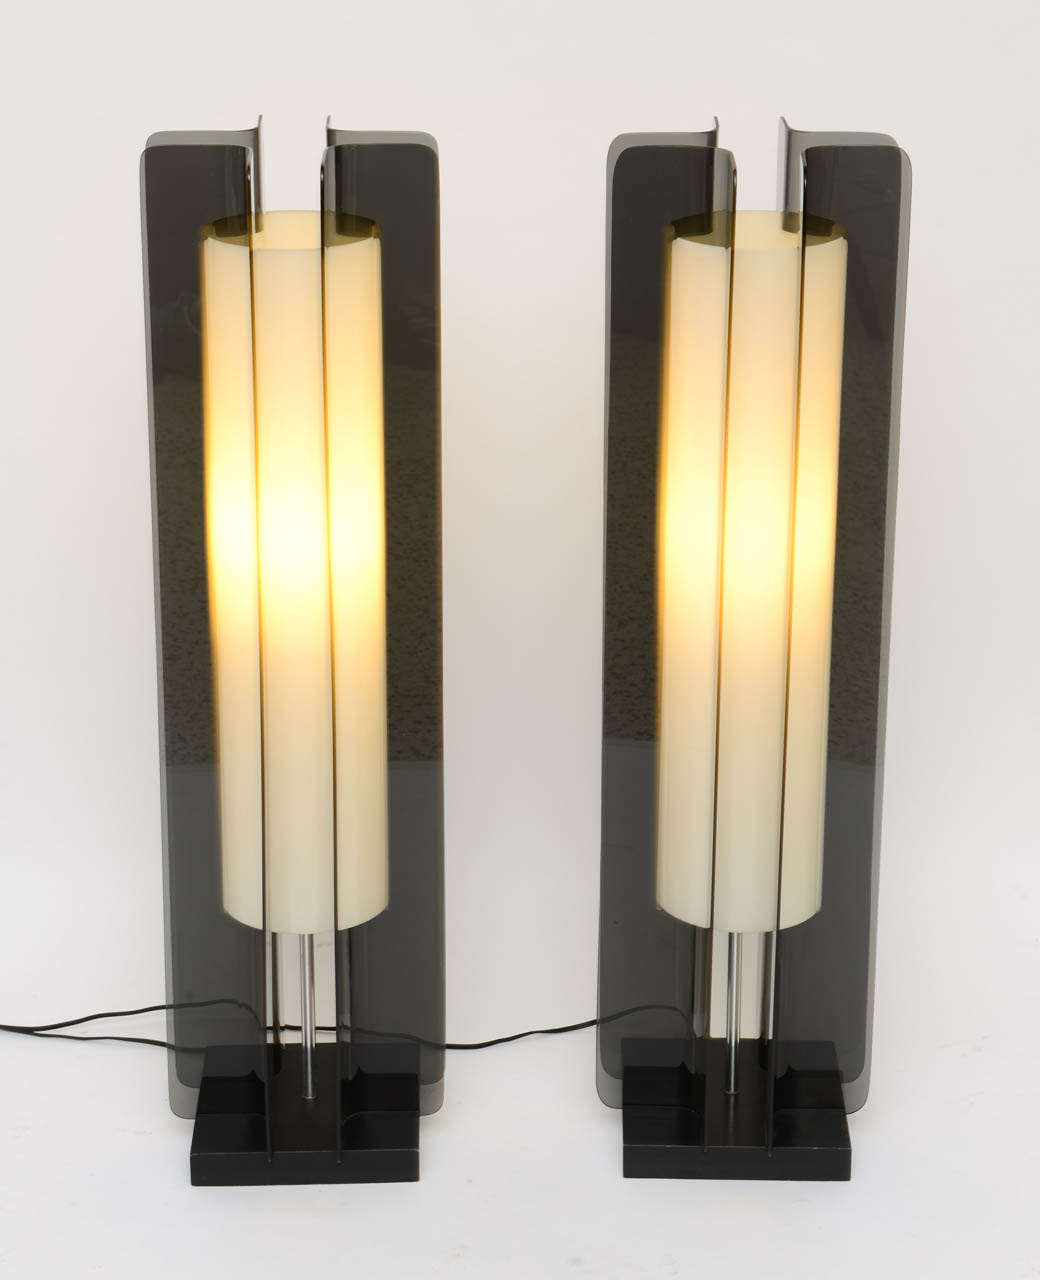 SOLD  Significant, very modern and architectural, this pair of towering table lamps or floor lamps in smoked acrylic or lucite stand tall at 36